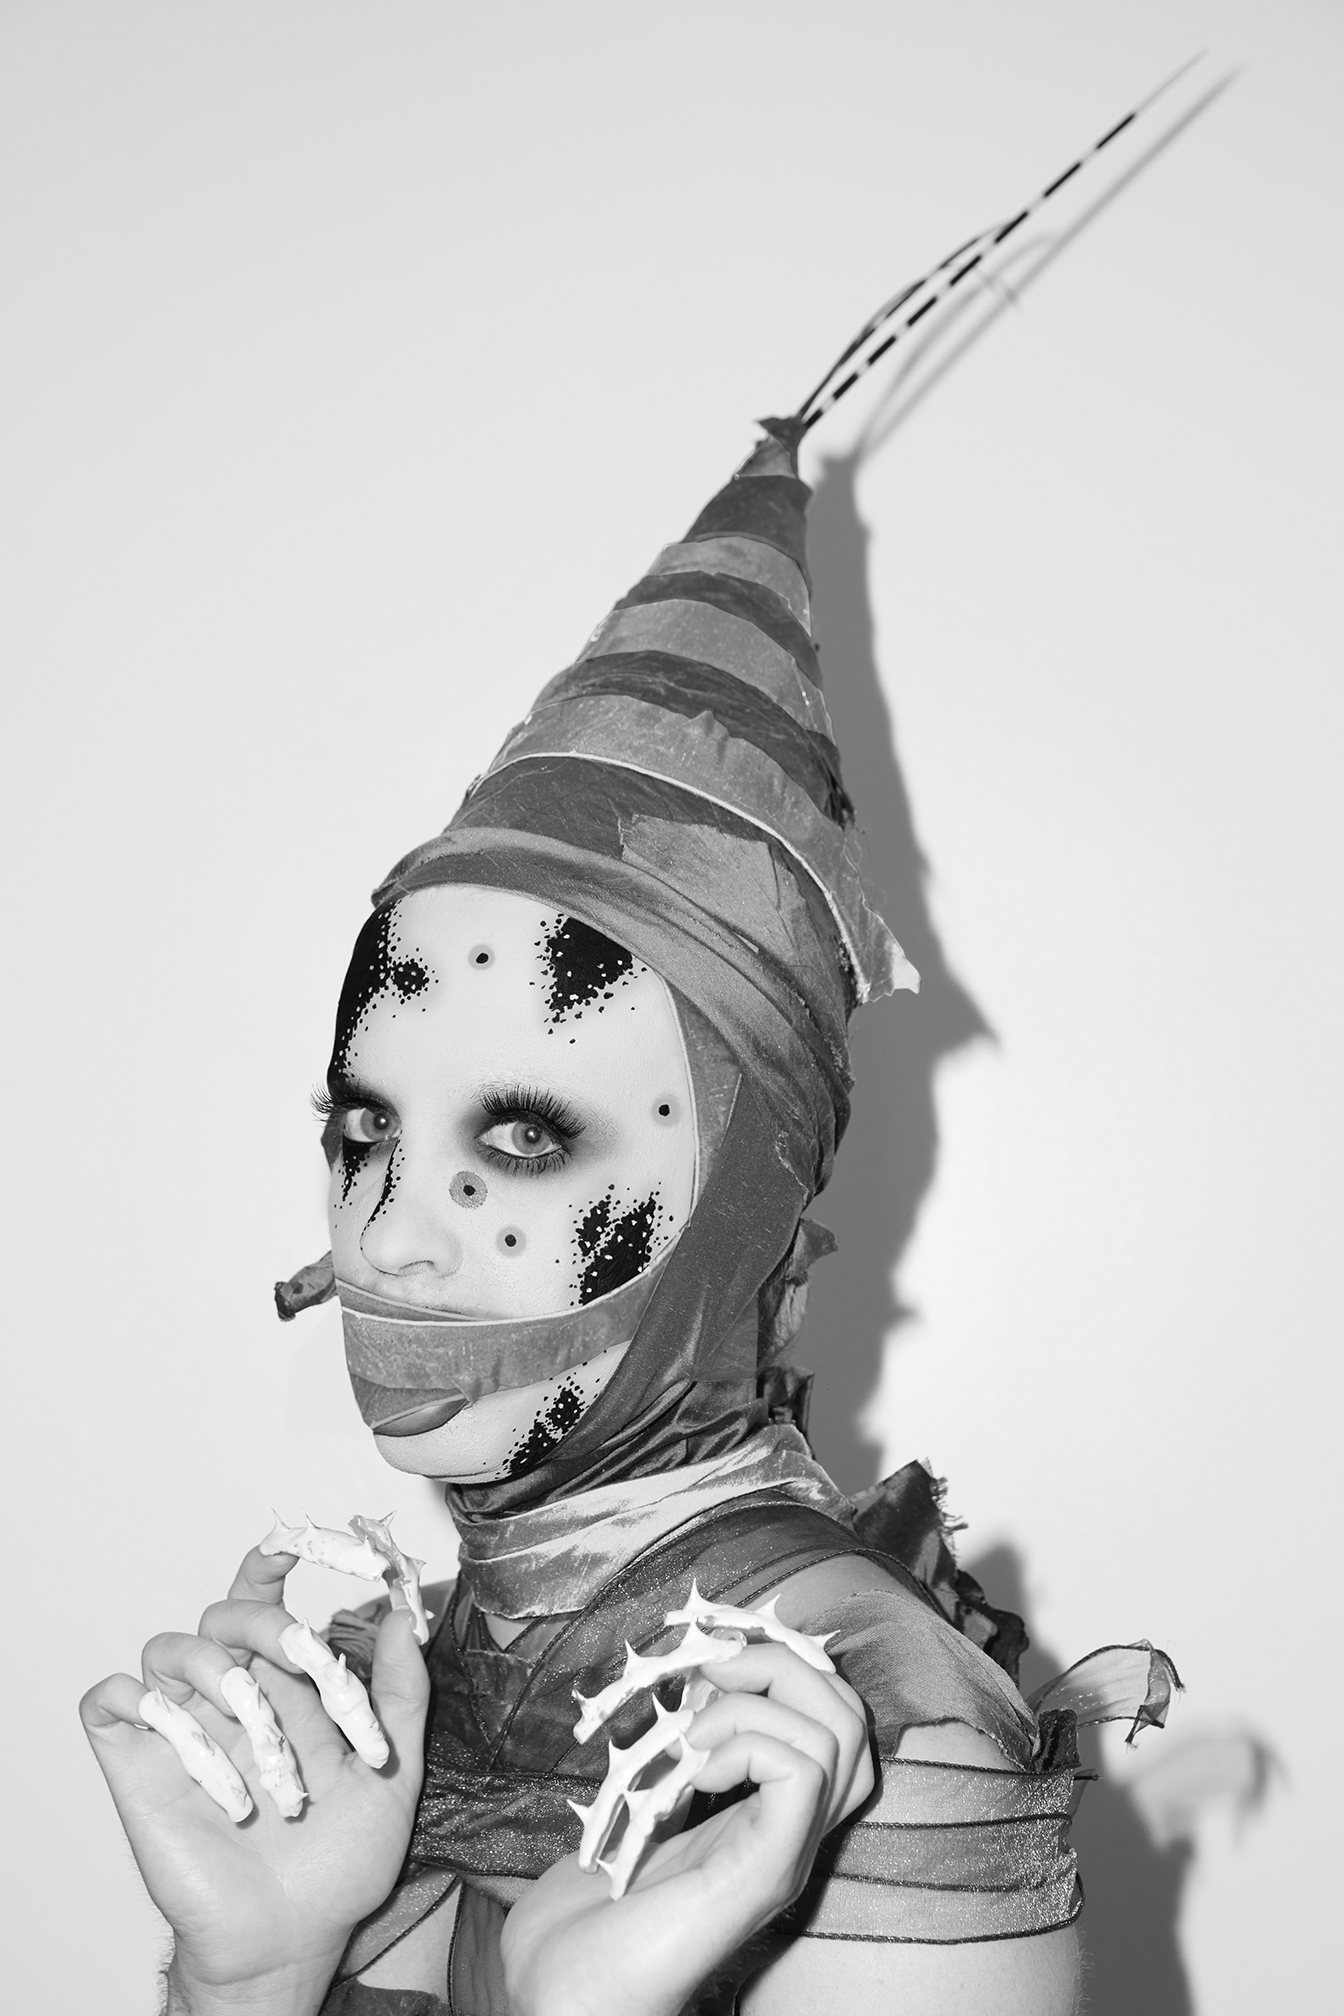 Jesse with graphic black and white facepaint on, his mouth covered with a strip of farbic and a fabric cone on his head against a white background